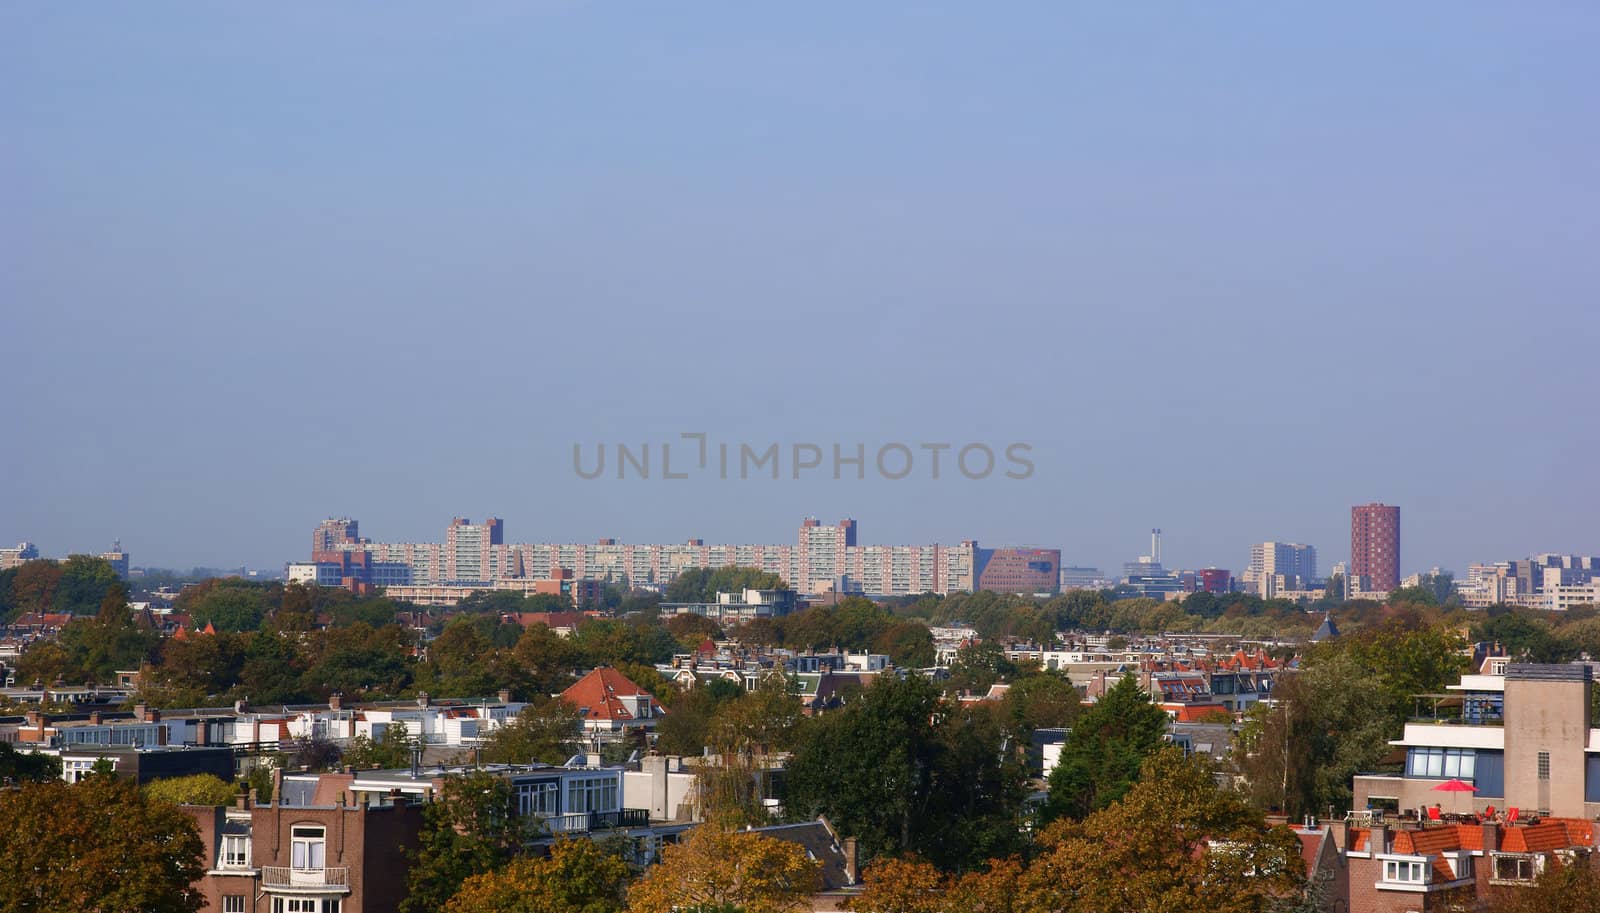 Skyline of the hague in early autumn